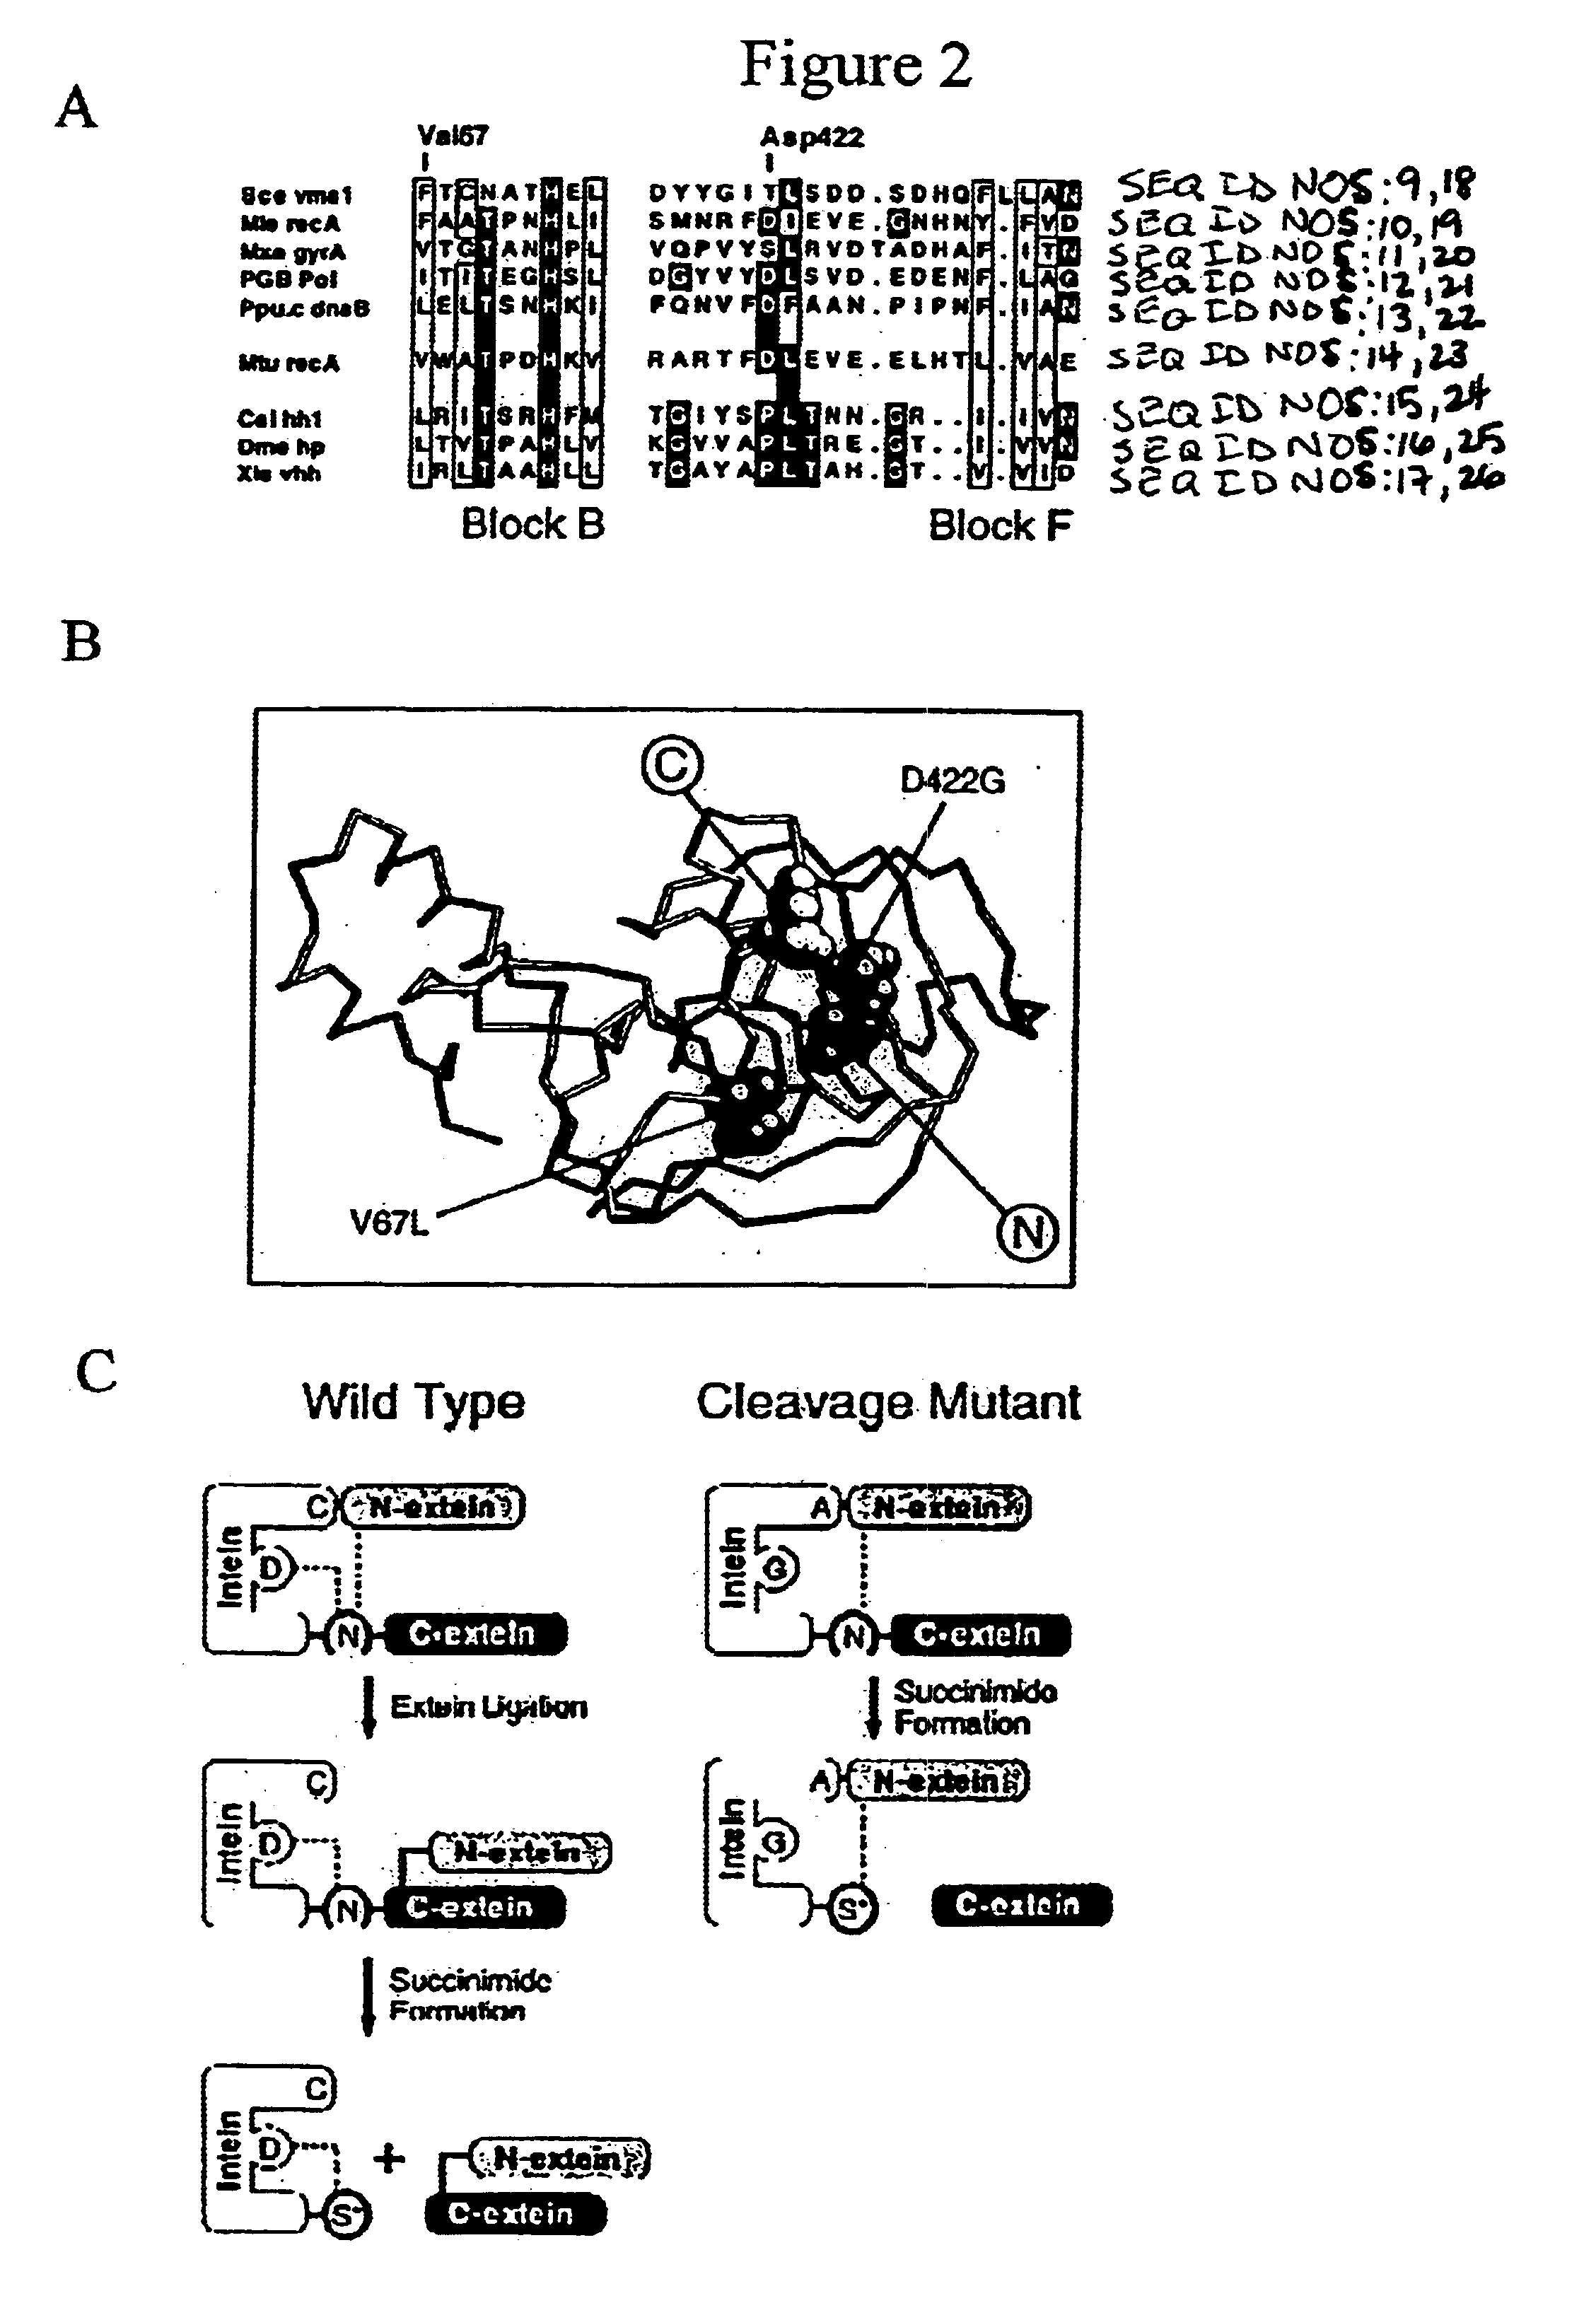 Genetic system and self-cleaving inteins derived therefrom, bioseparations and protein purification employing same, and methods for determining critical, generalizable amino acid residues for varying intein activity